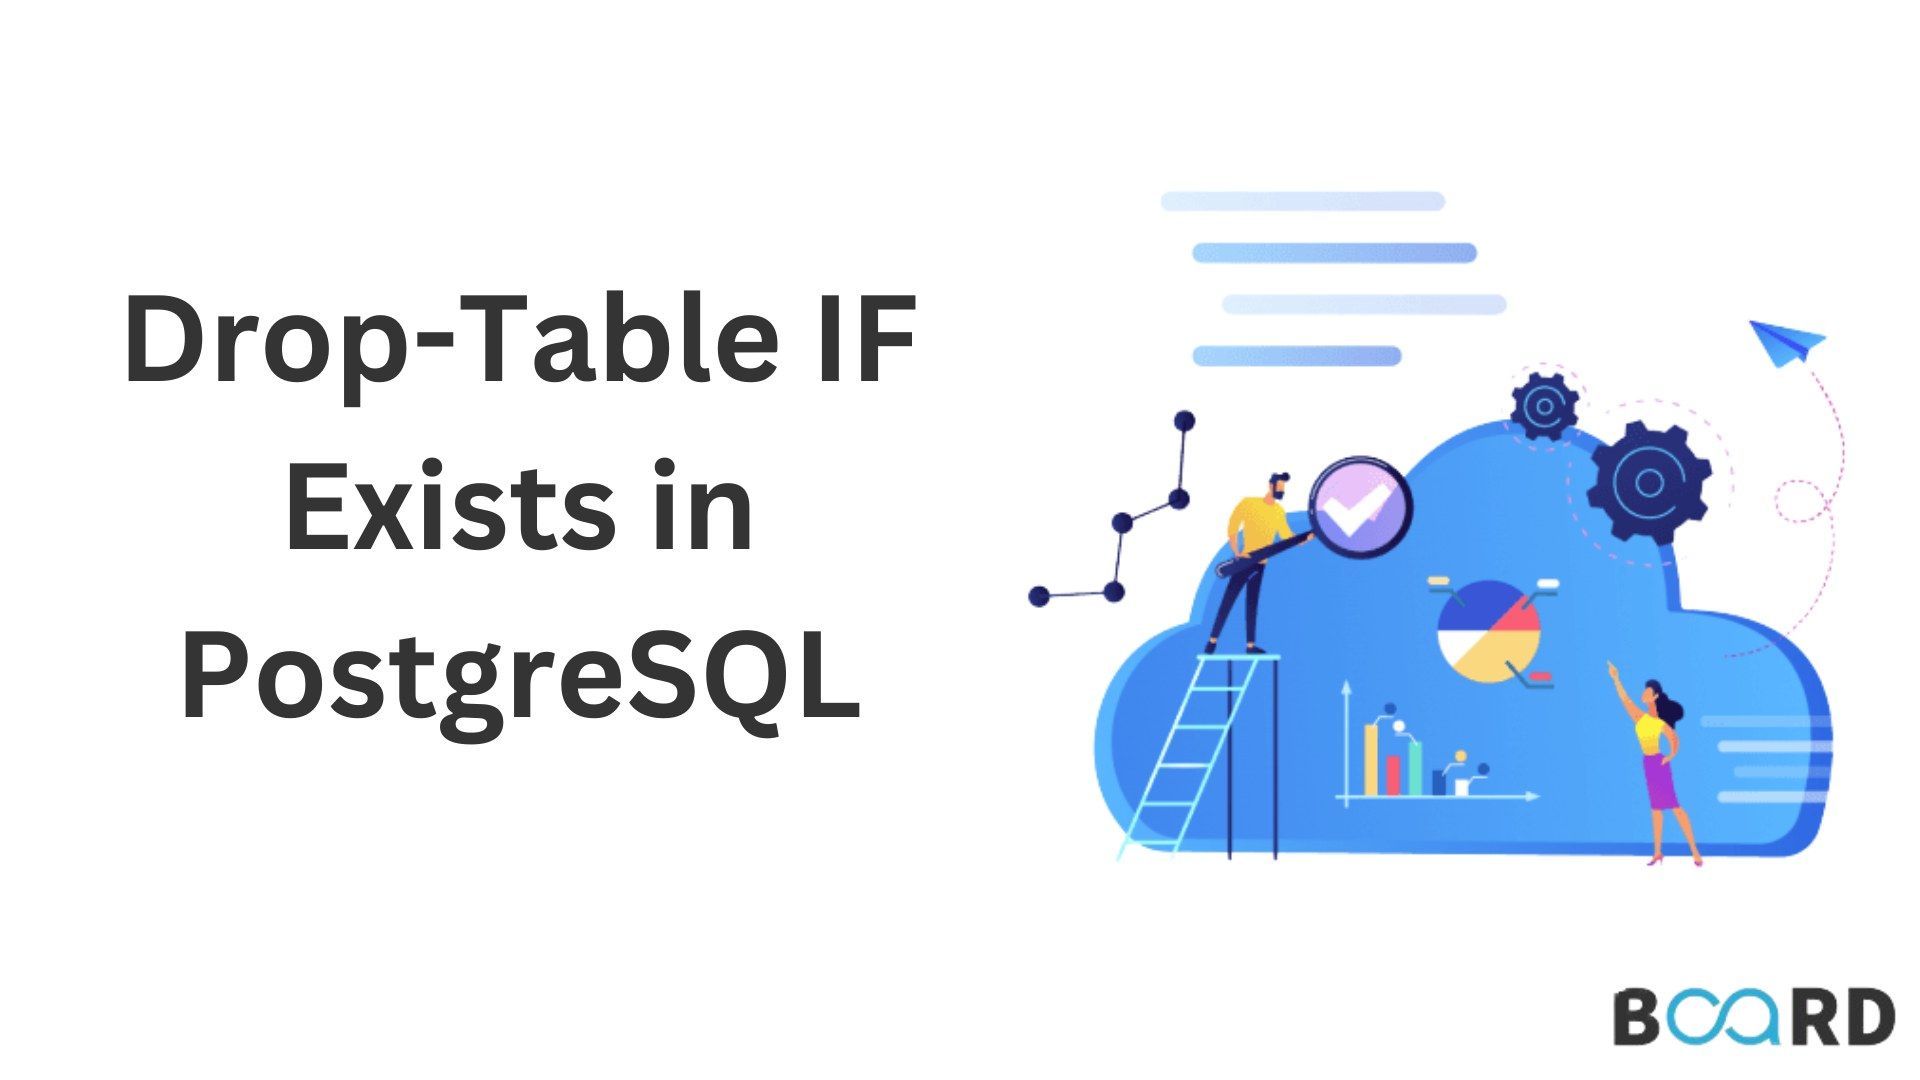 How to Drop a Table in PostgreSQL?